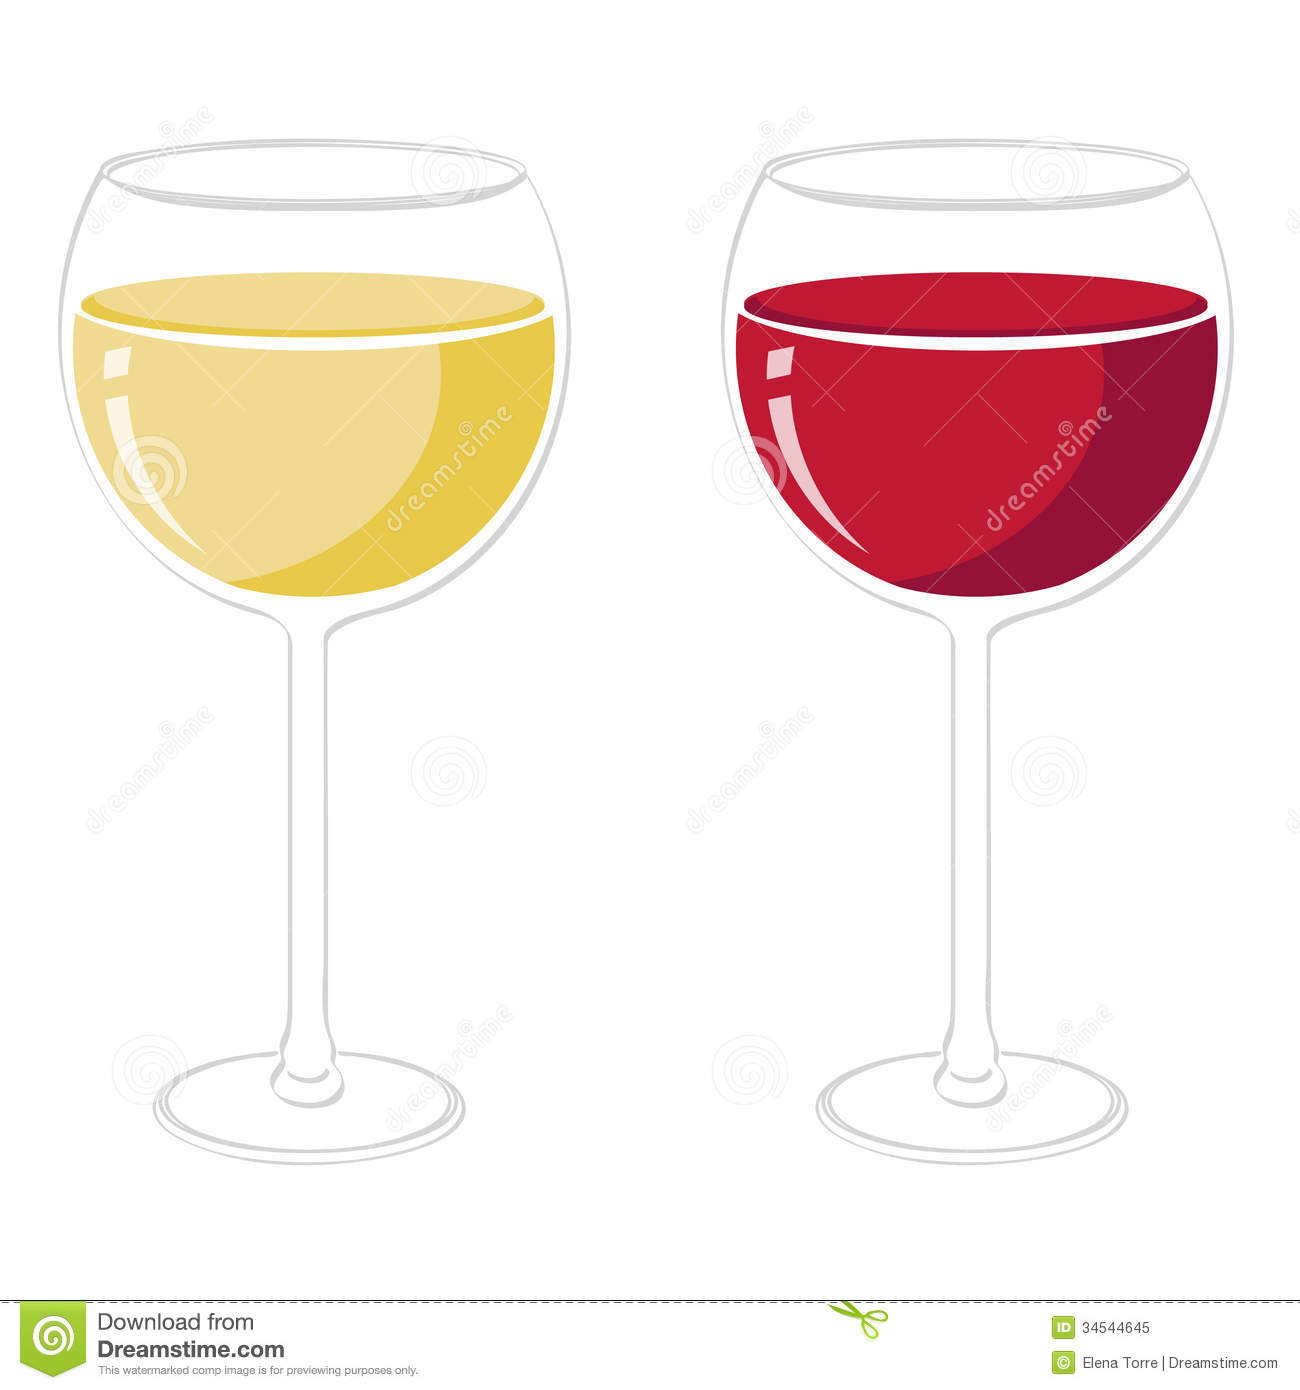 Illustration Of Red And White Wine Glasses Isolated   Vector Eps File